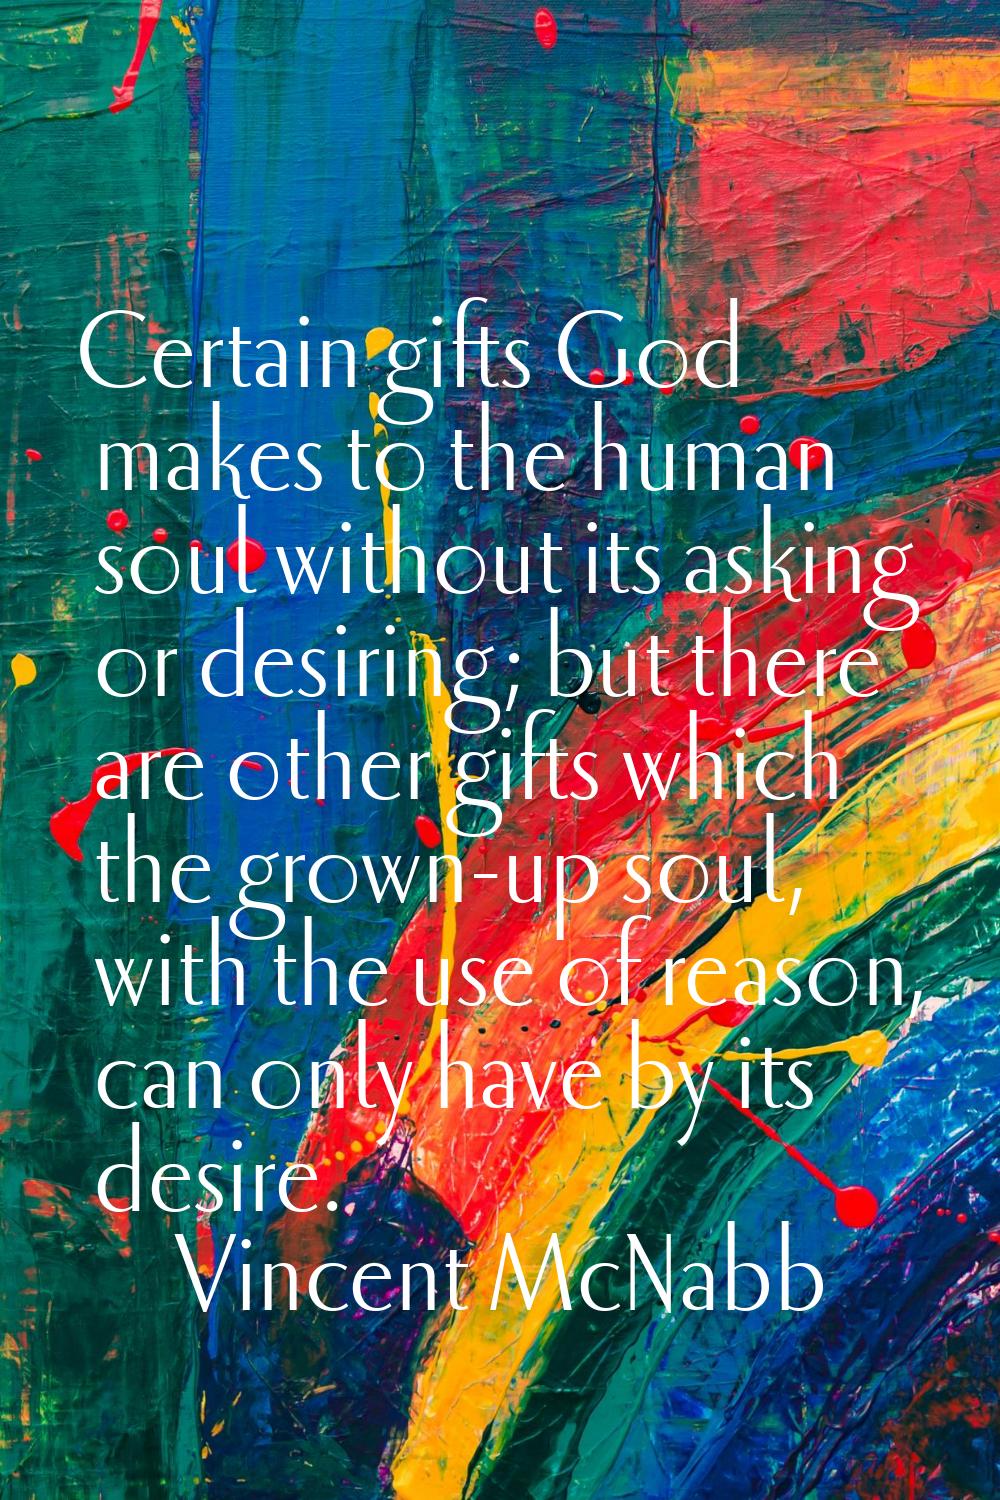 Certain gifts God makes to the human soul without its asking or desiring; but there are other gifts